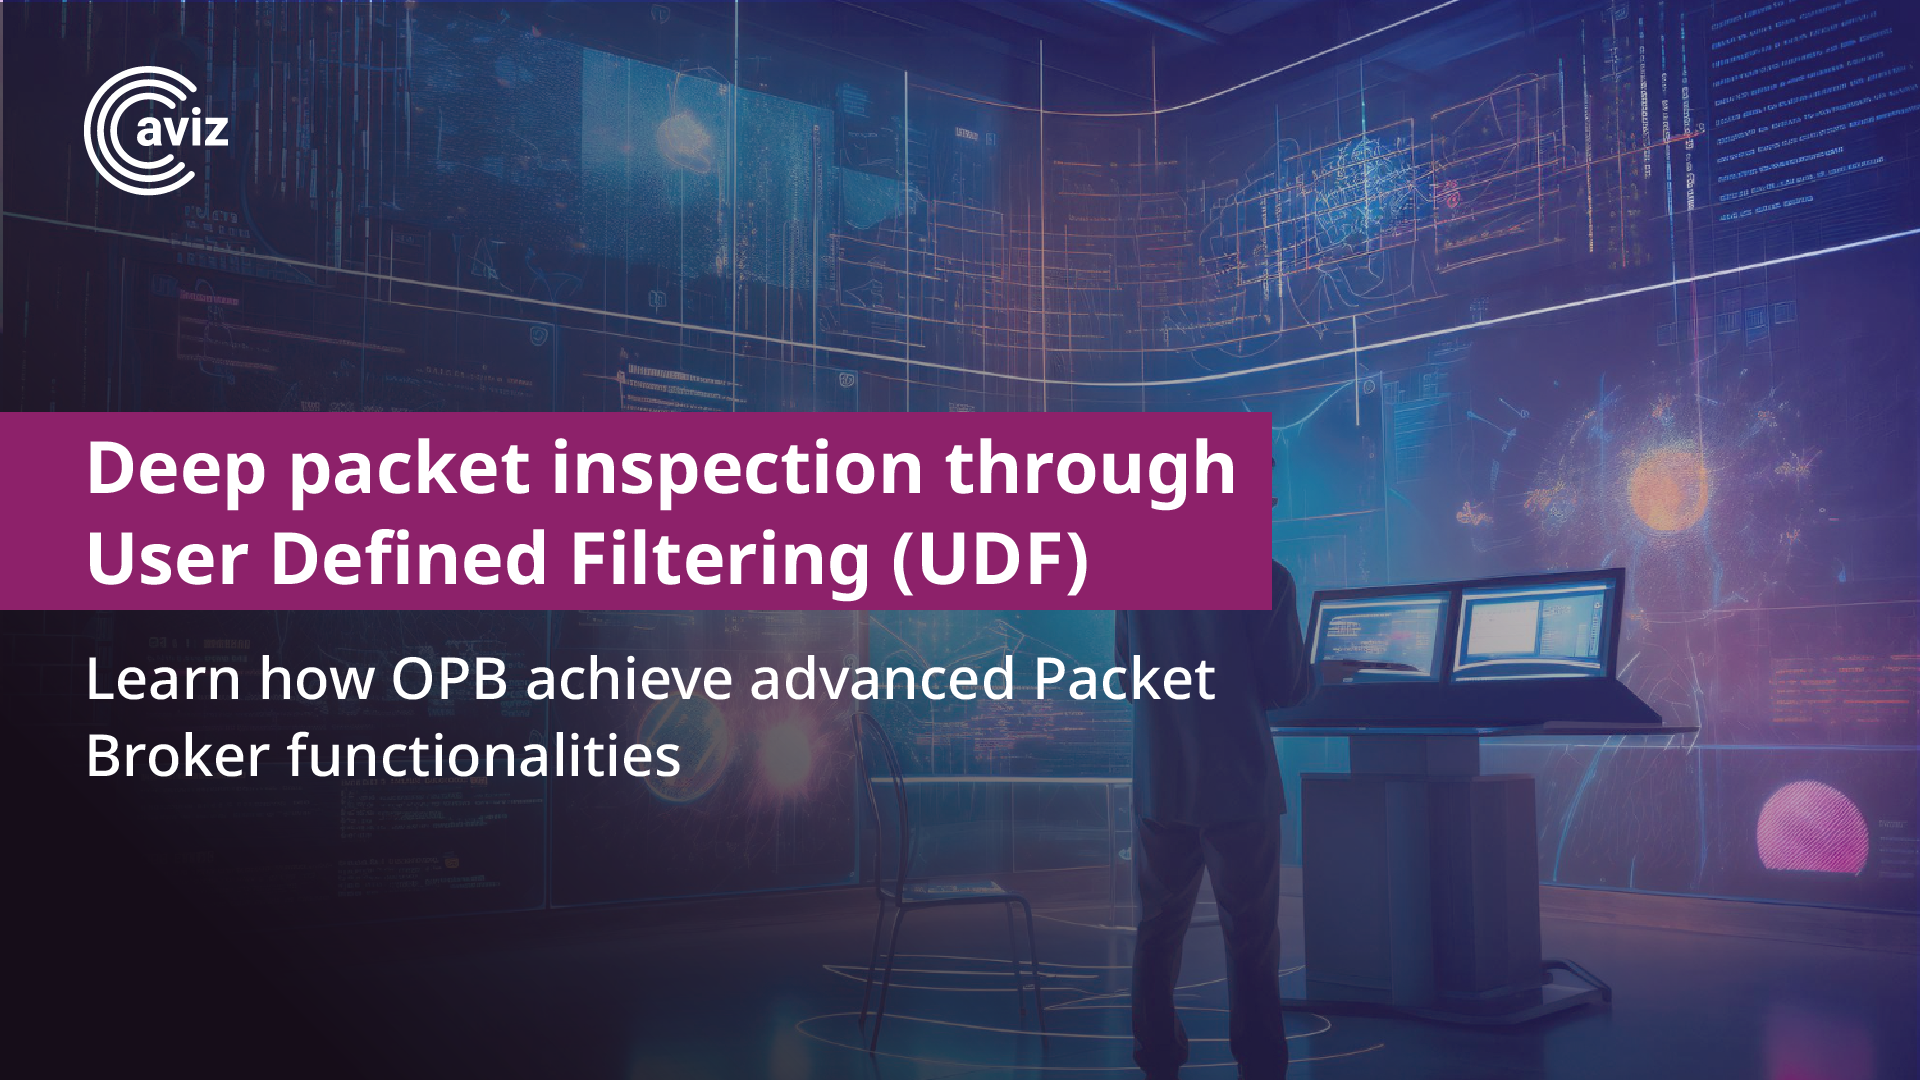 Deep packet inspection through User Defined Filtering (UDF) with Open Packet Broker